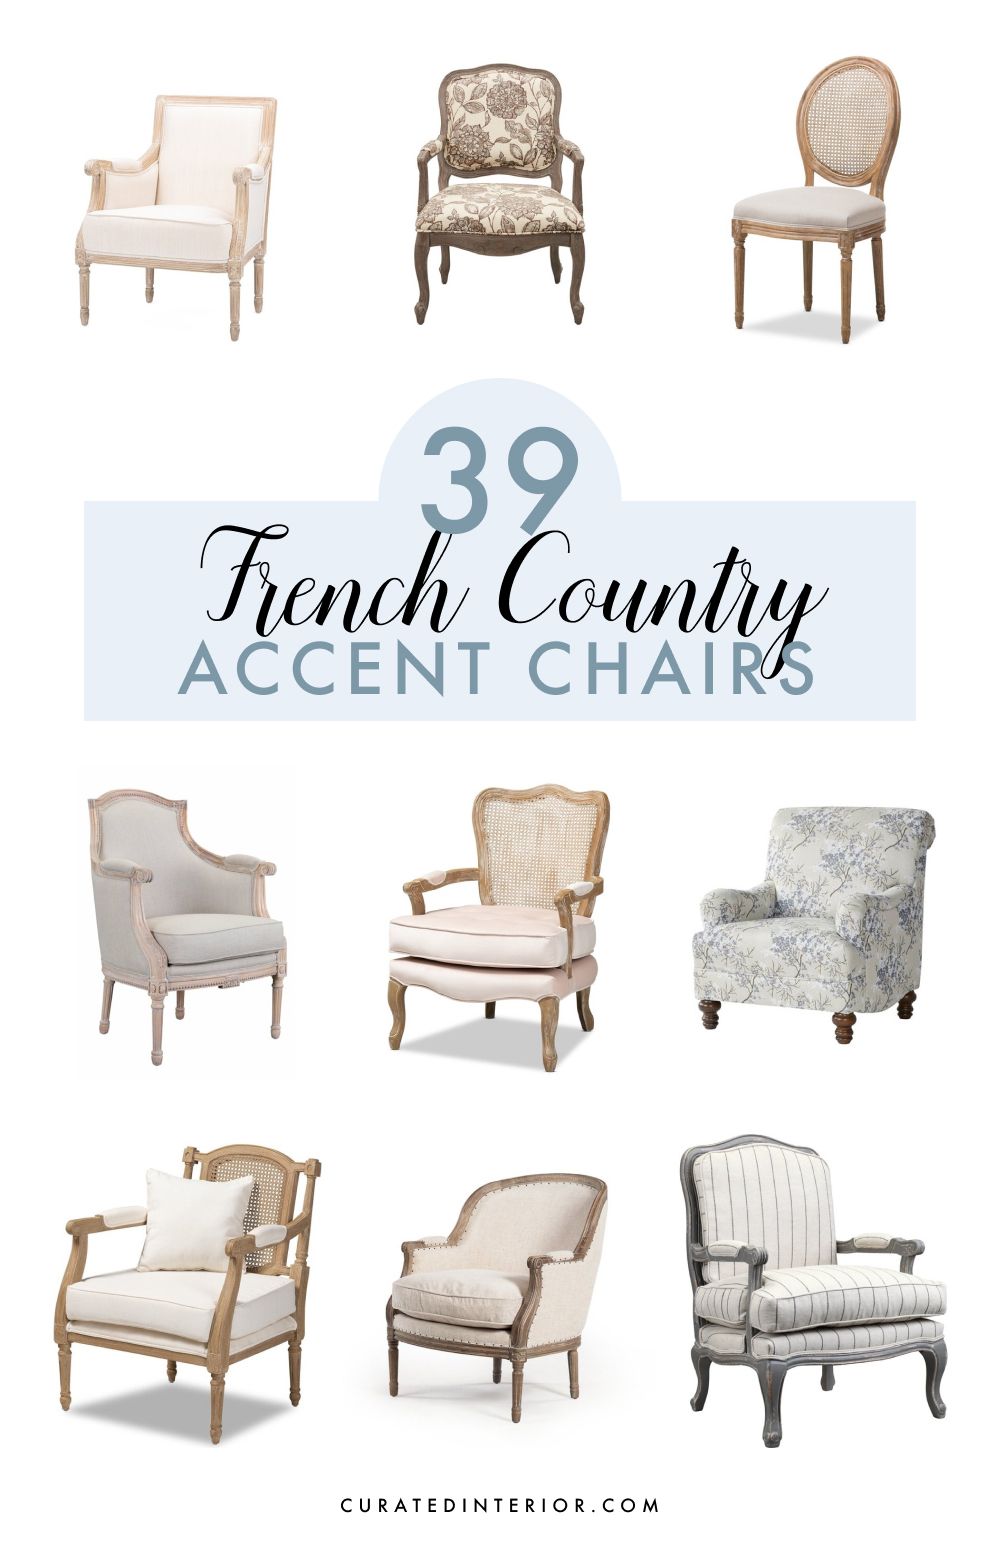 39 French Country Accent Chairs You Will Love!